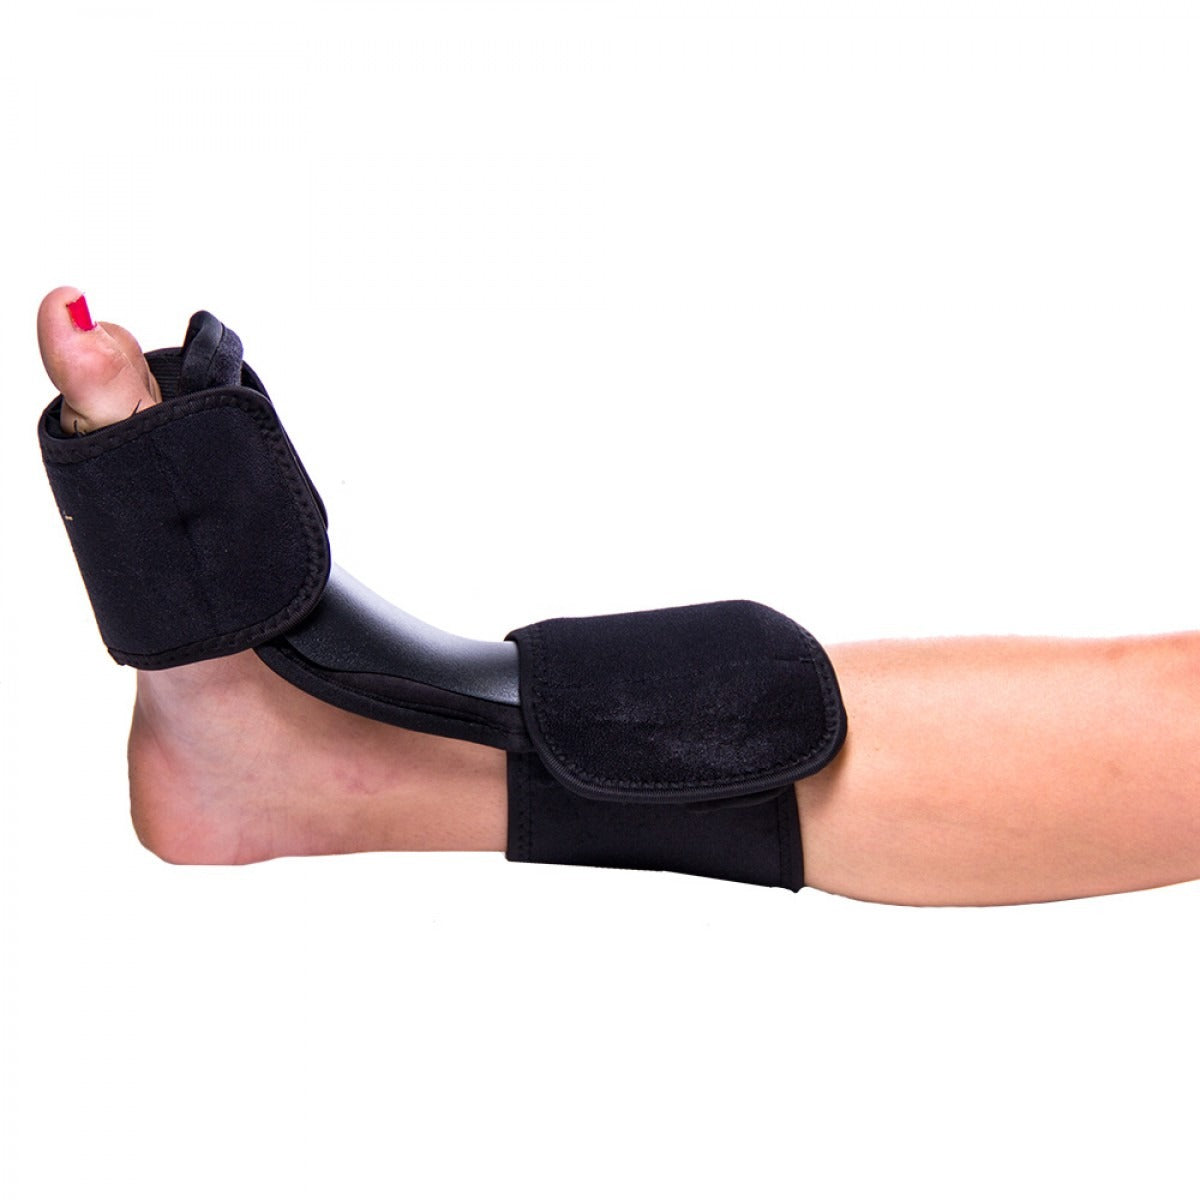 Sewn-in memory foam support pad for user comfort when treating foot injuries